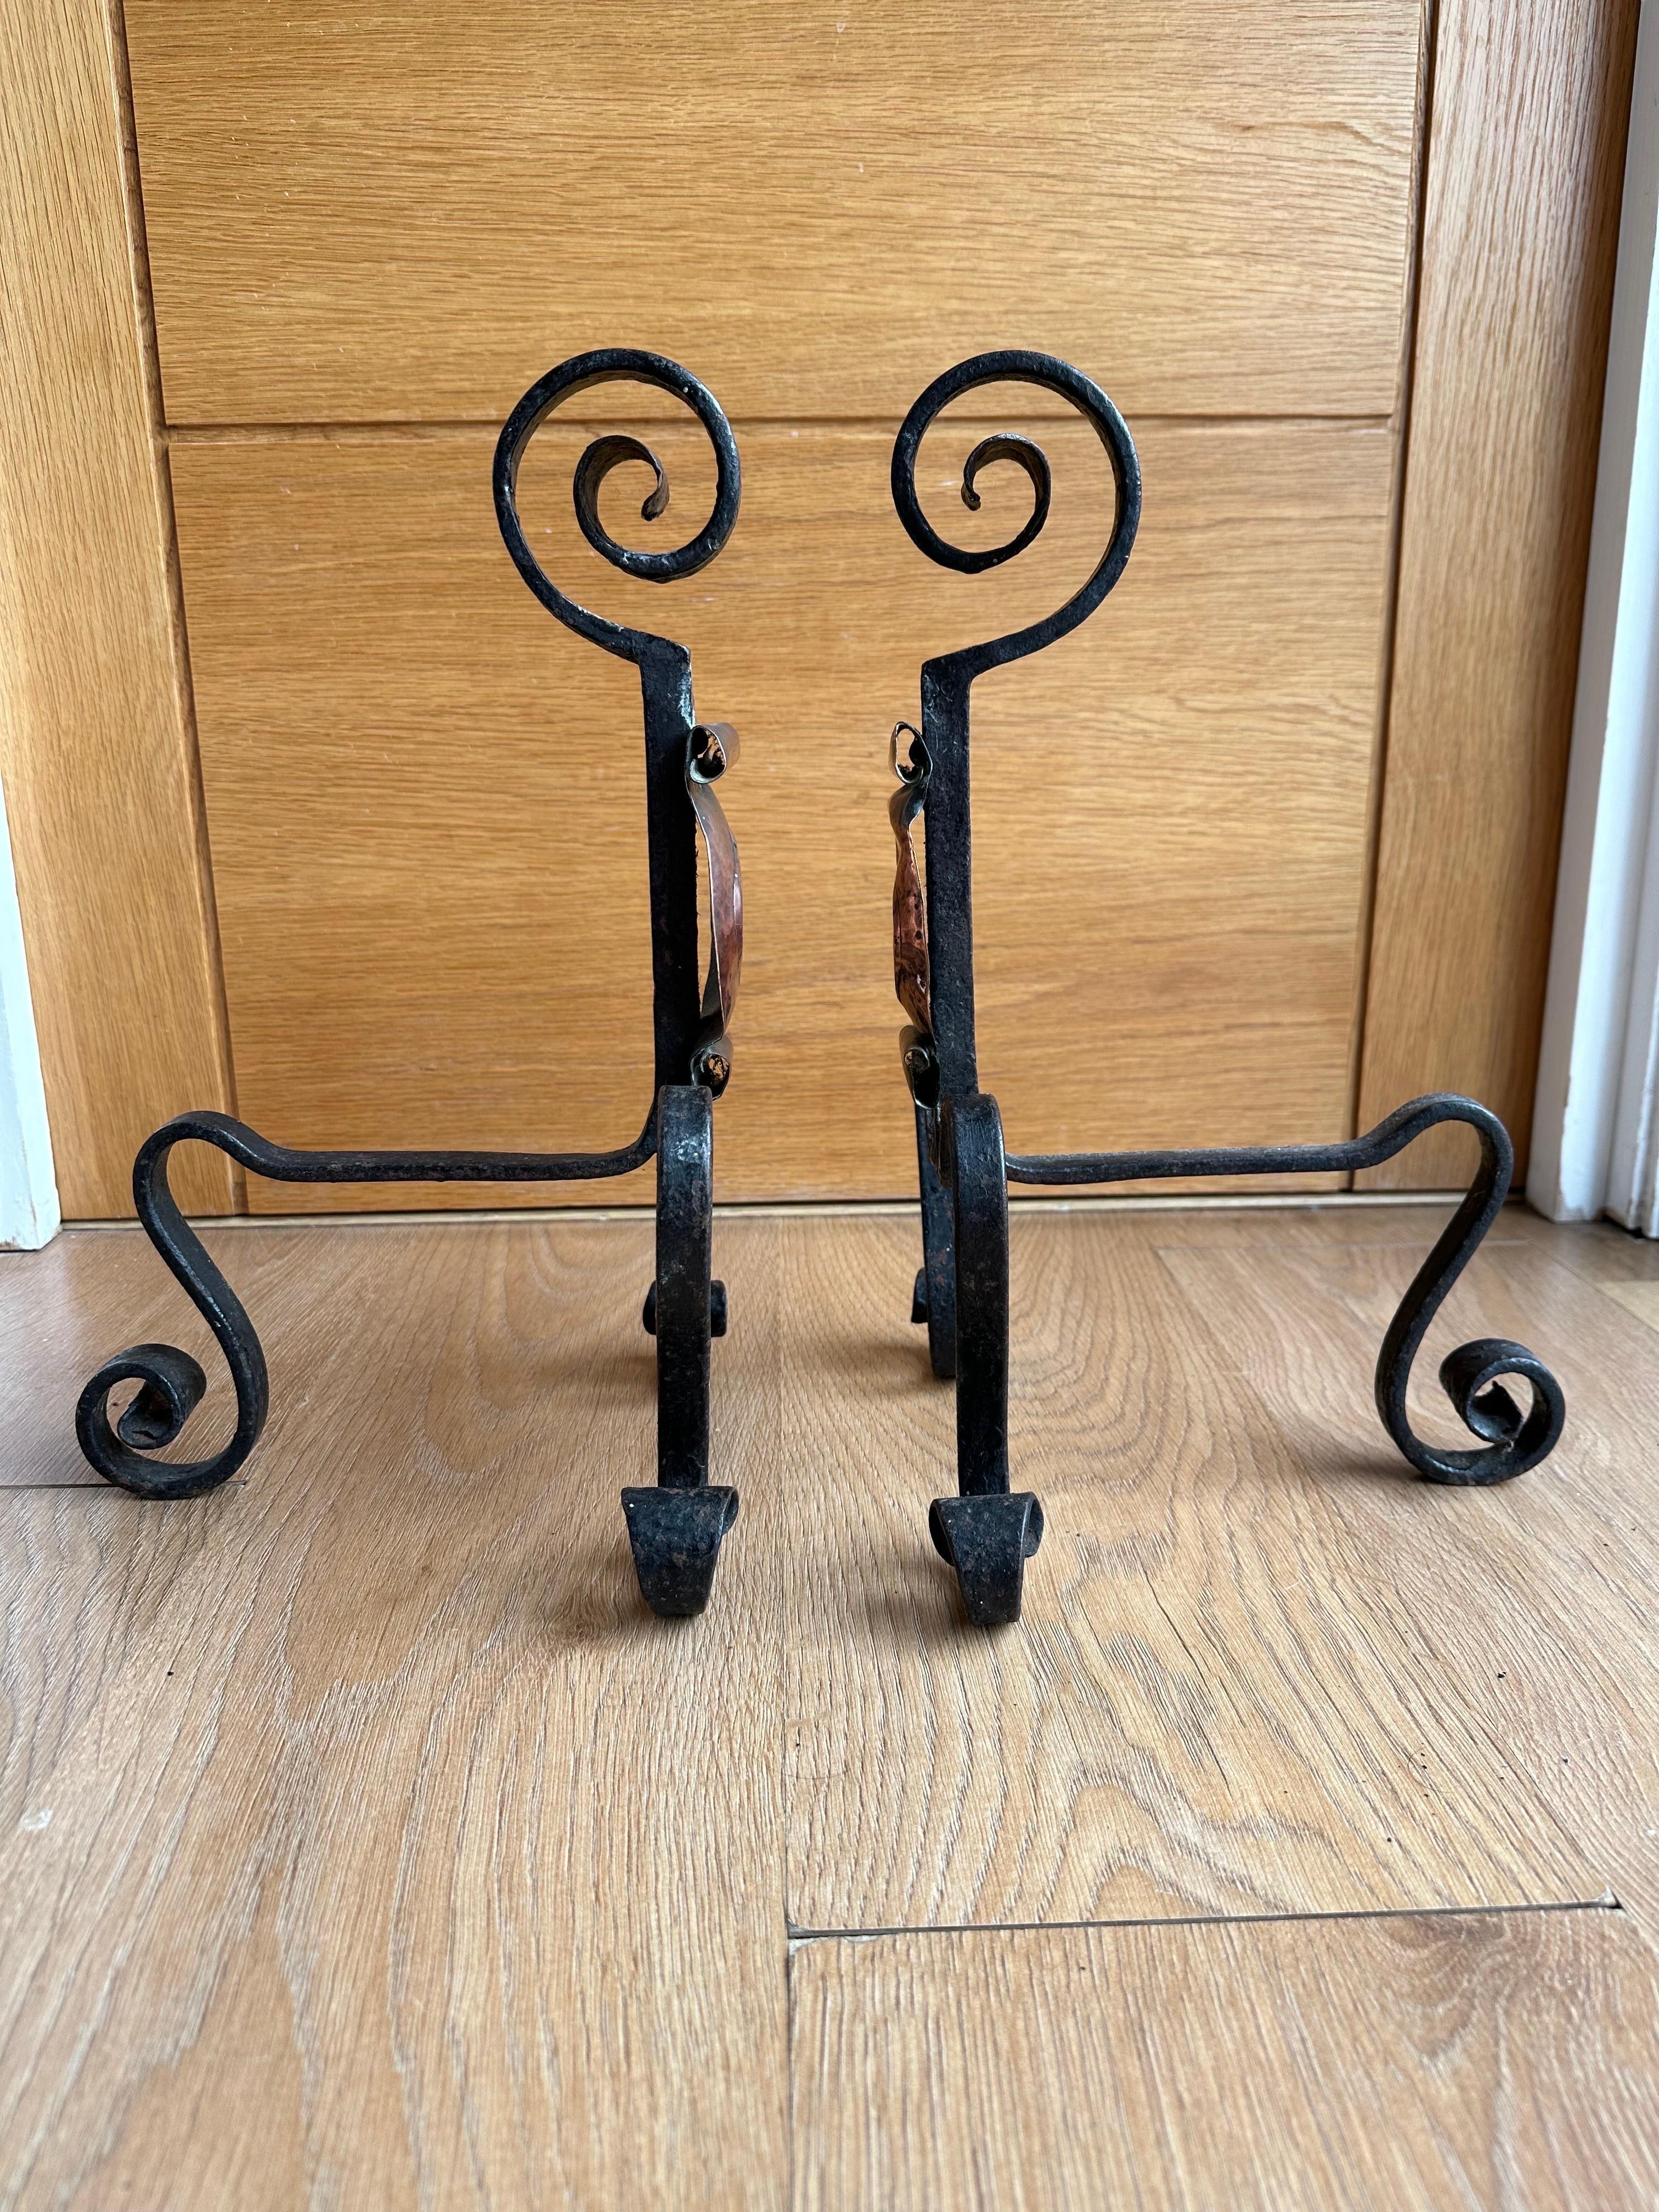 Handwrought Iron and Copper Gothic Fireplace Andirons Firedogs, 19th Century For Sale 1